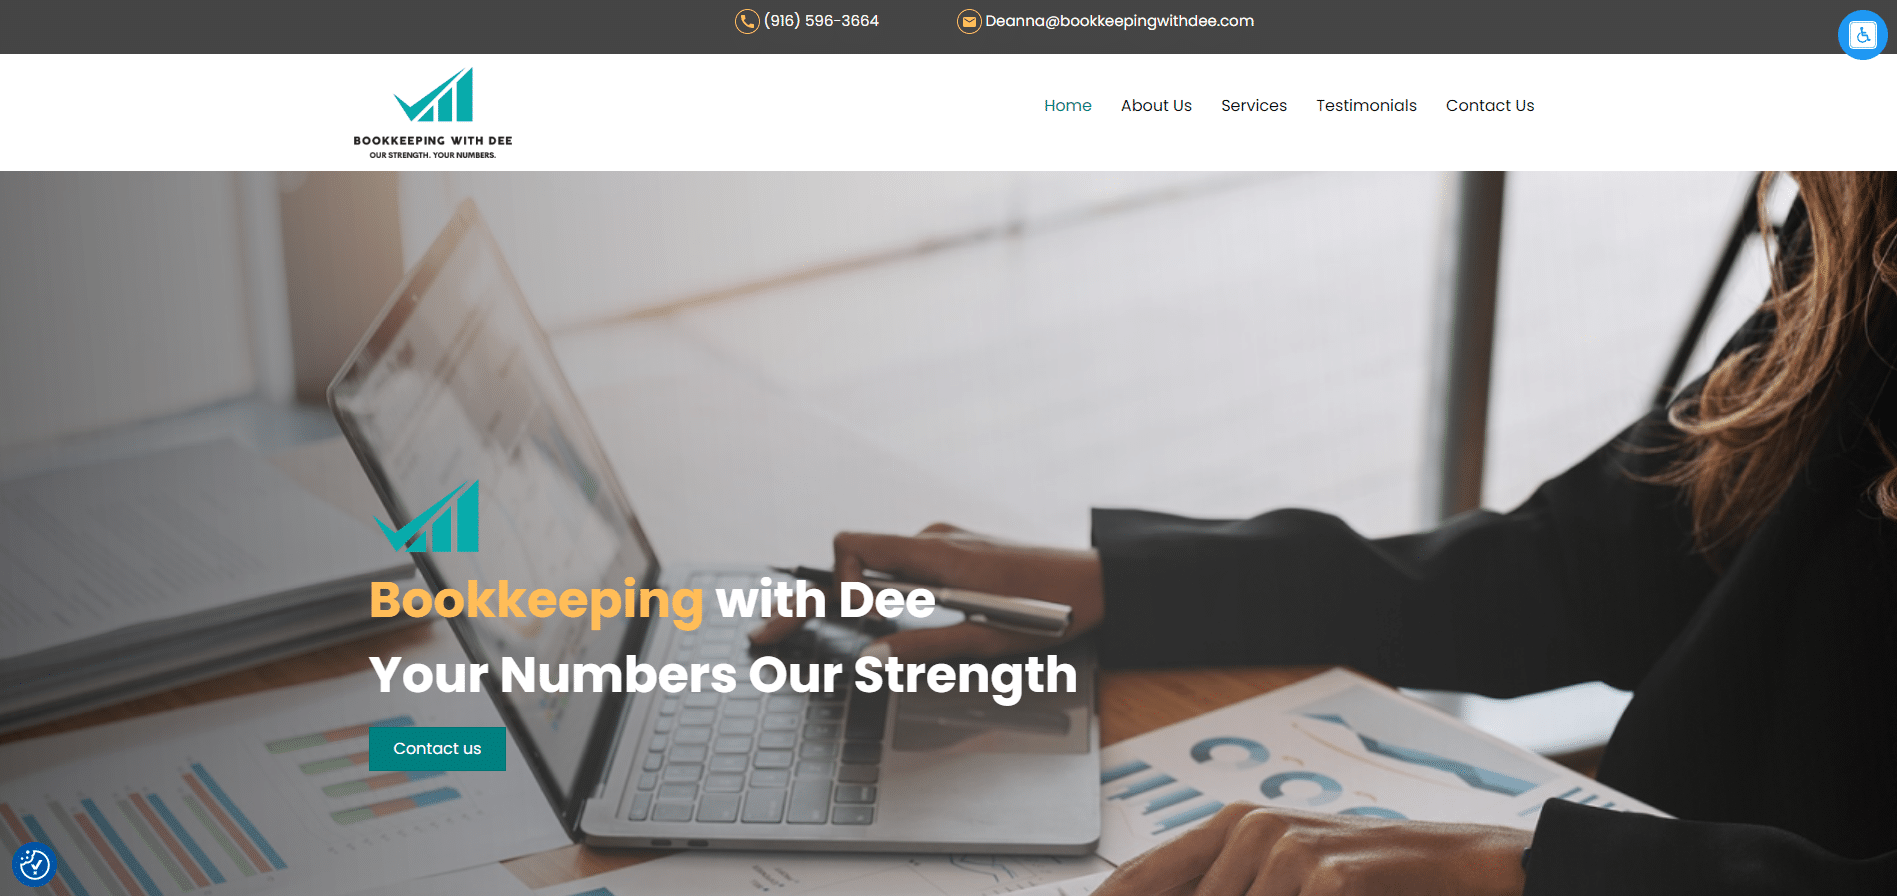 Sacramento bookkeeping website redesign new home page